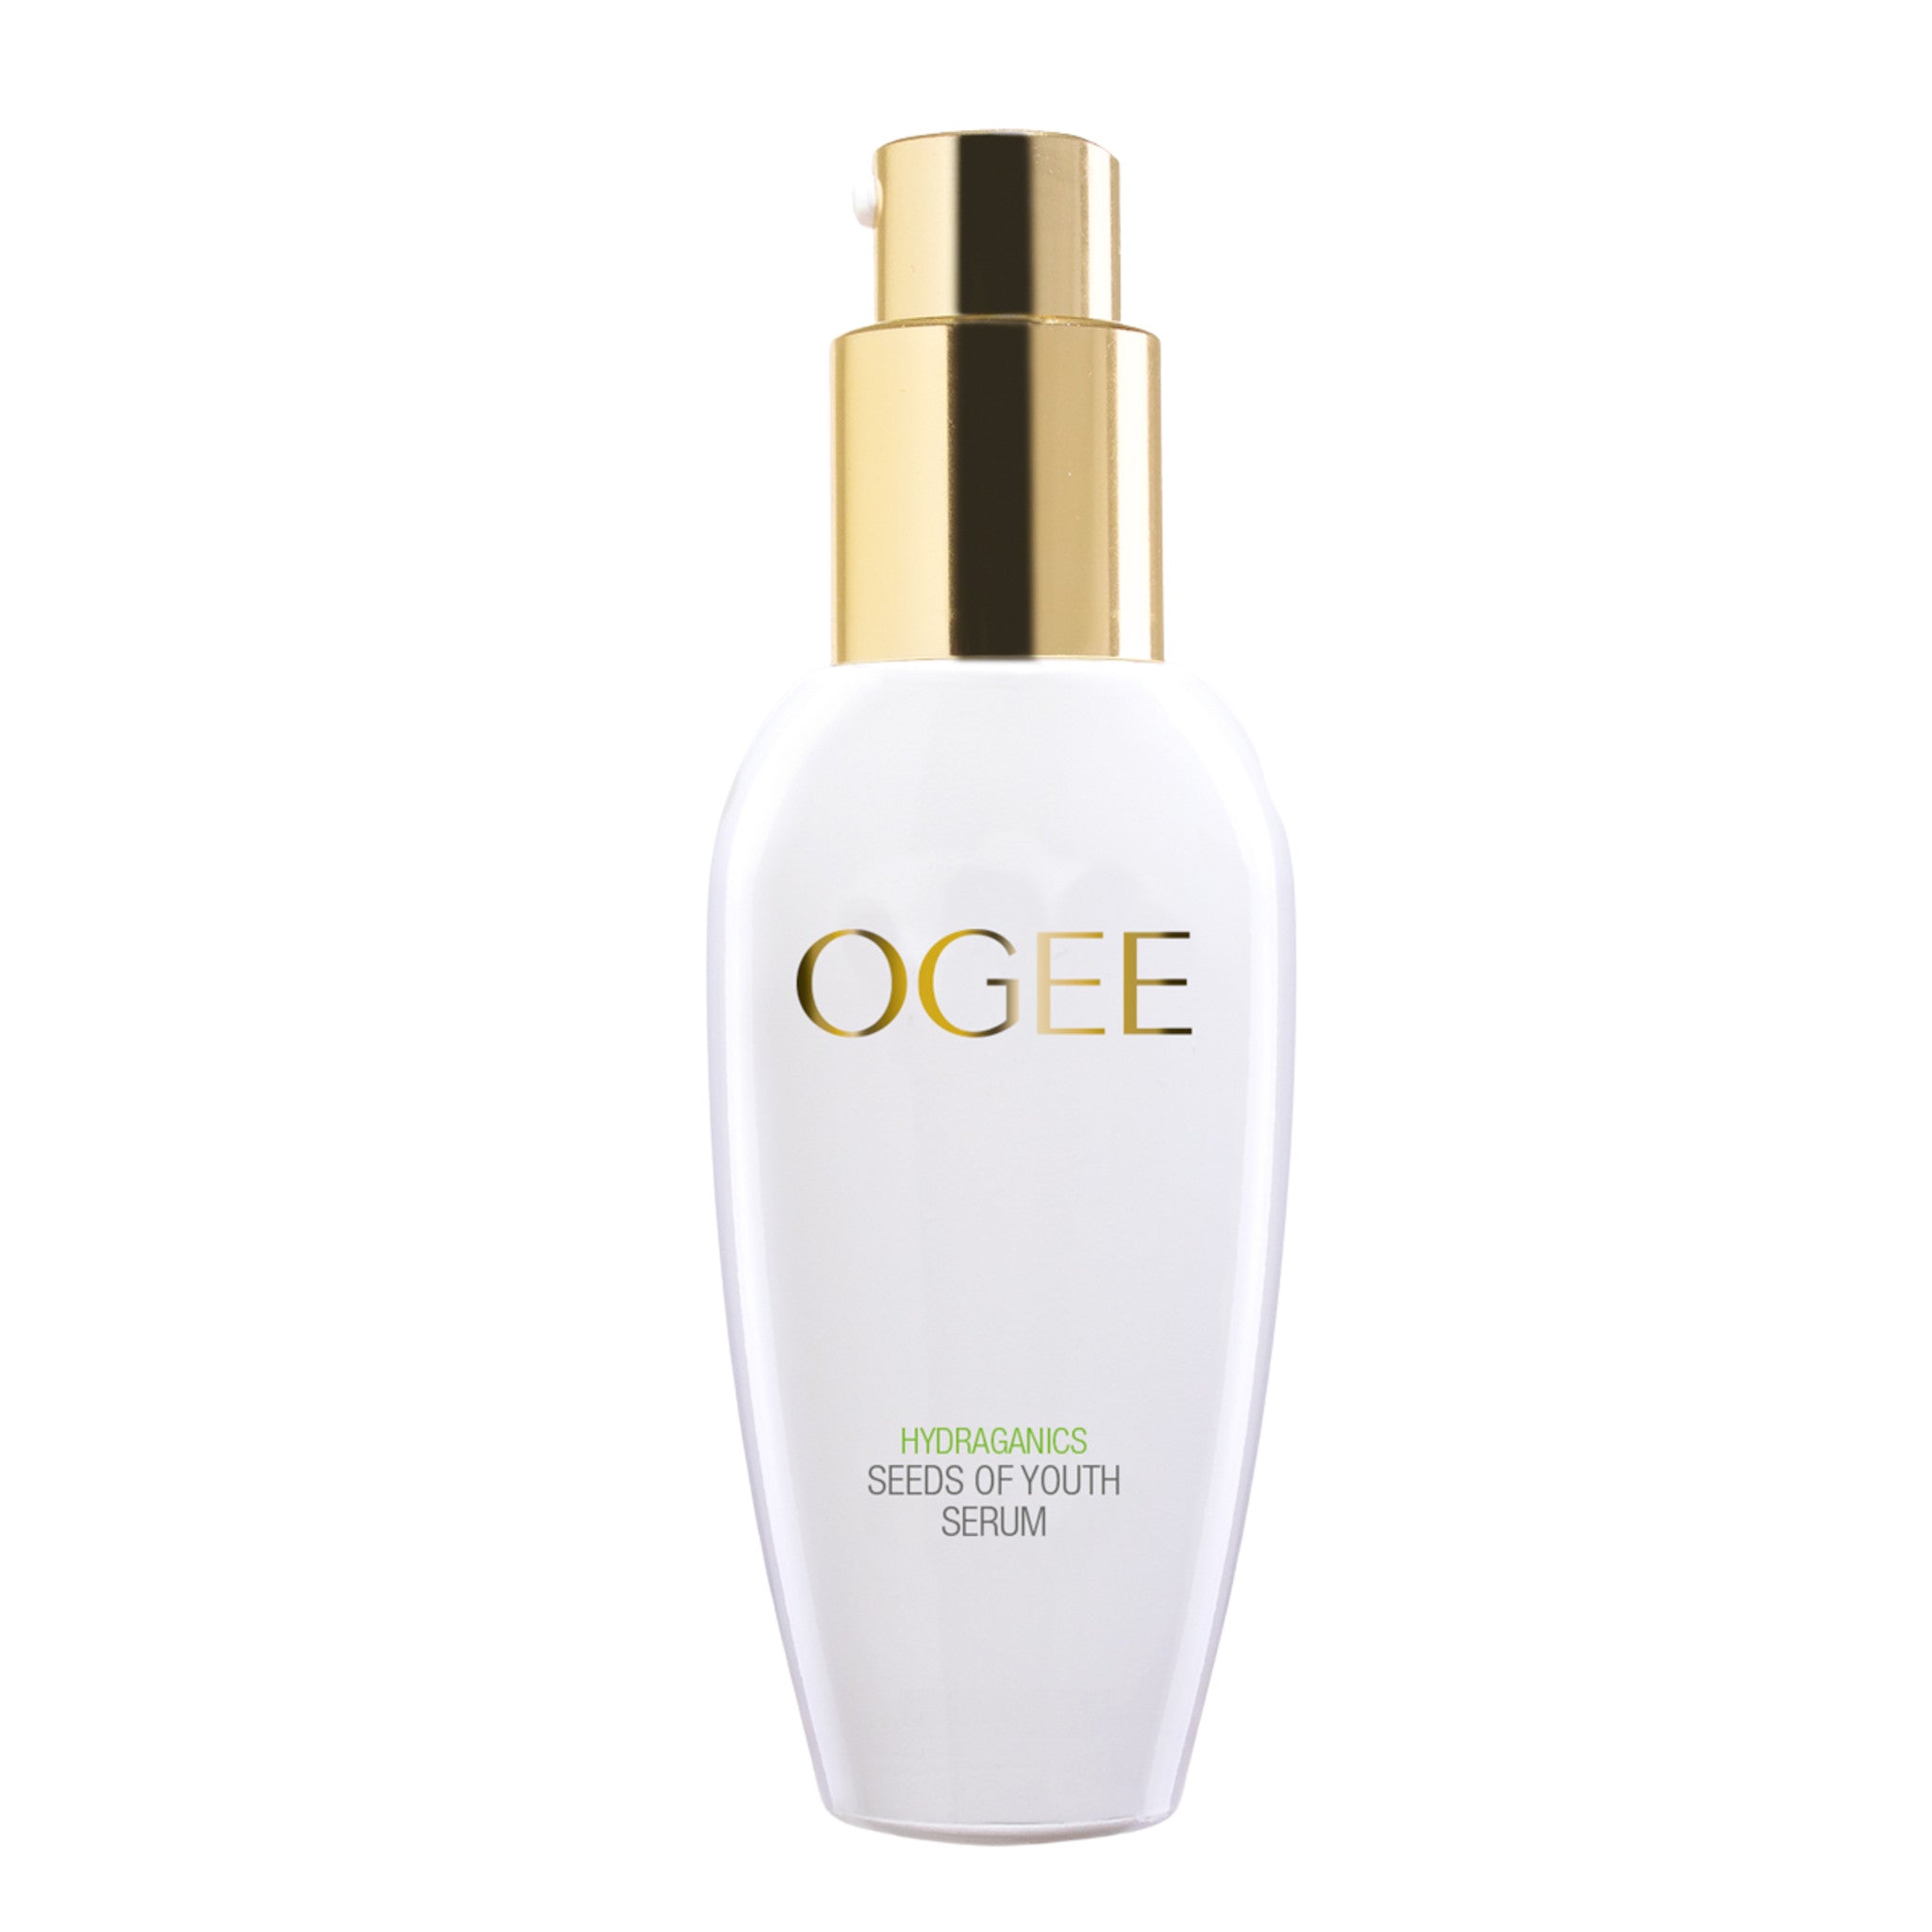 Ogee Seeds of Youth Serum main image.